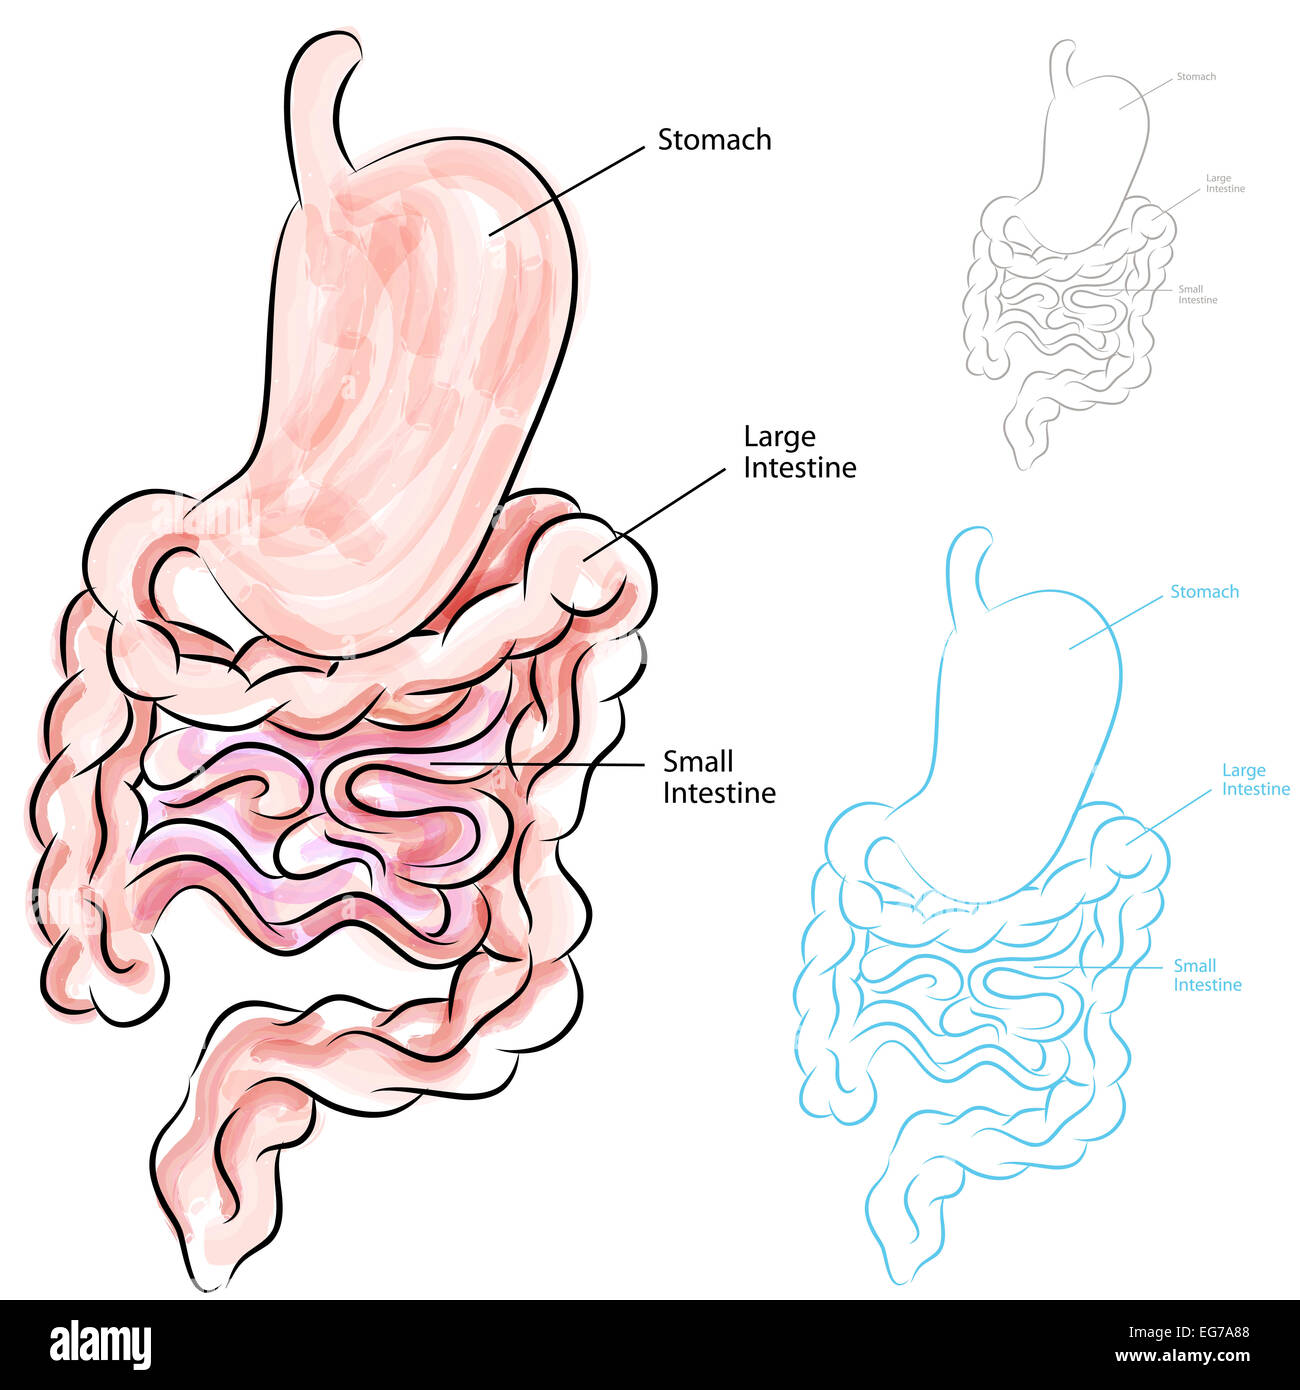 An image of a human digestive system. Stock Photo